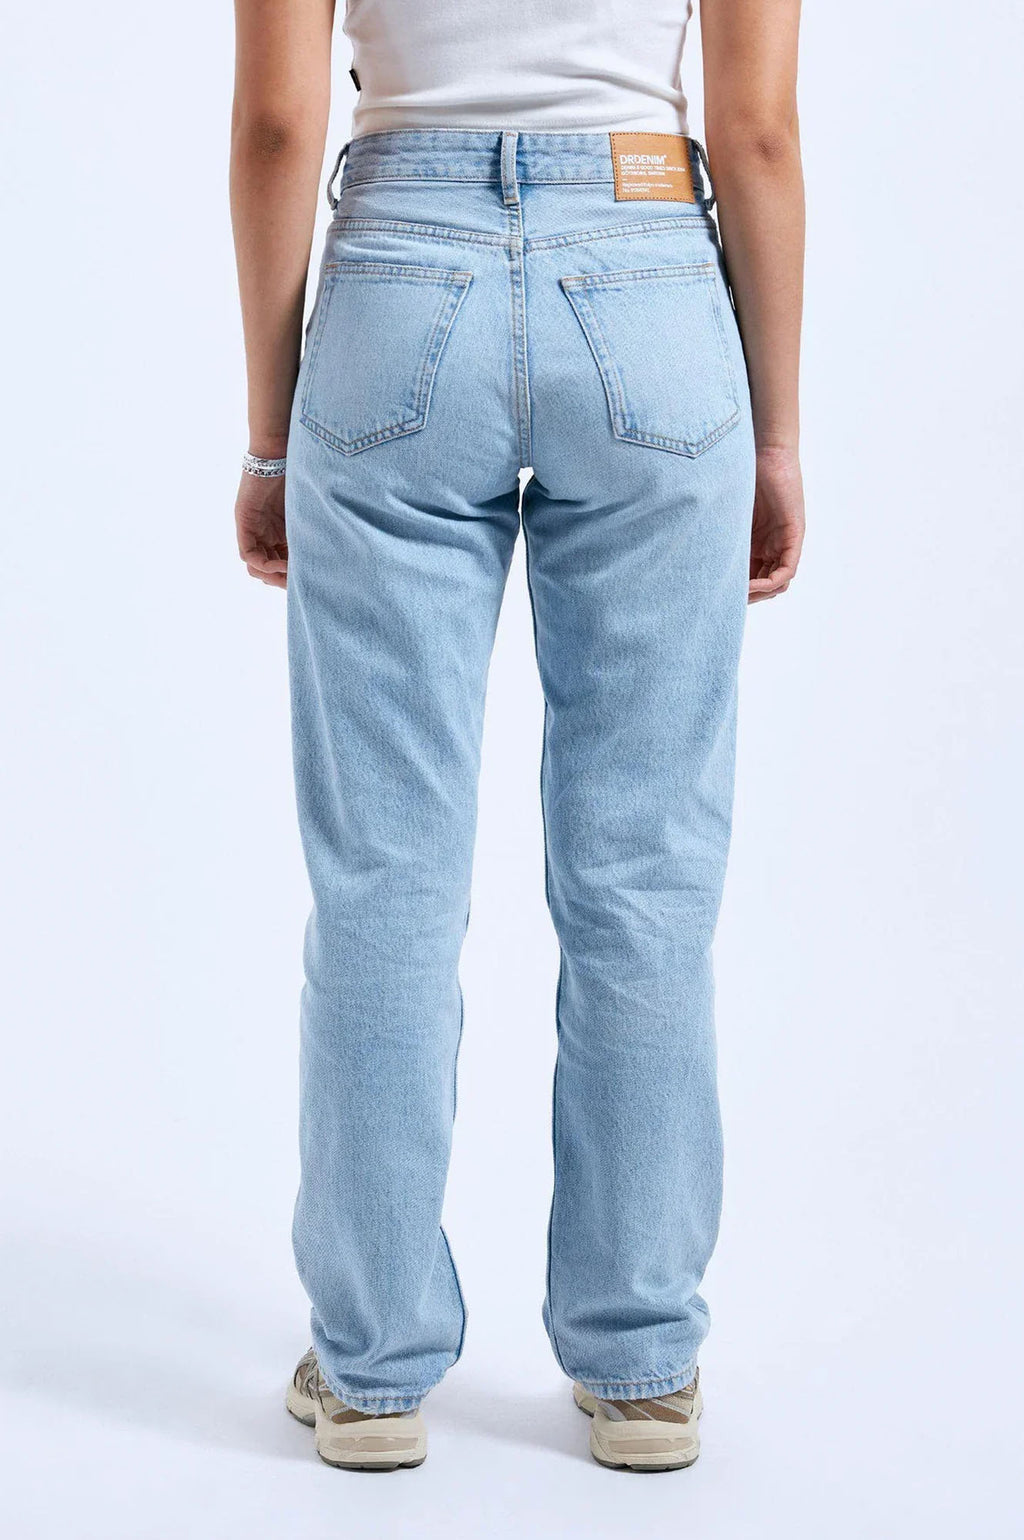 Dr Denim Arch Stream Light Used Jeans - The Mercantile London